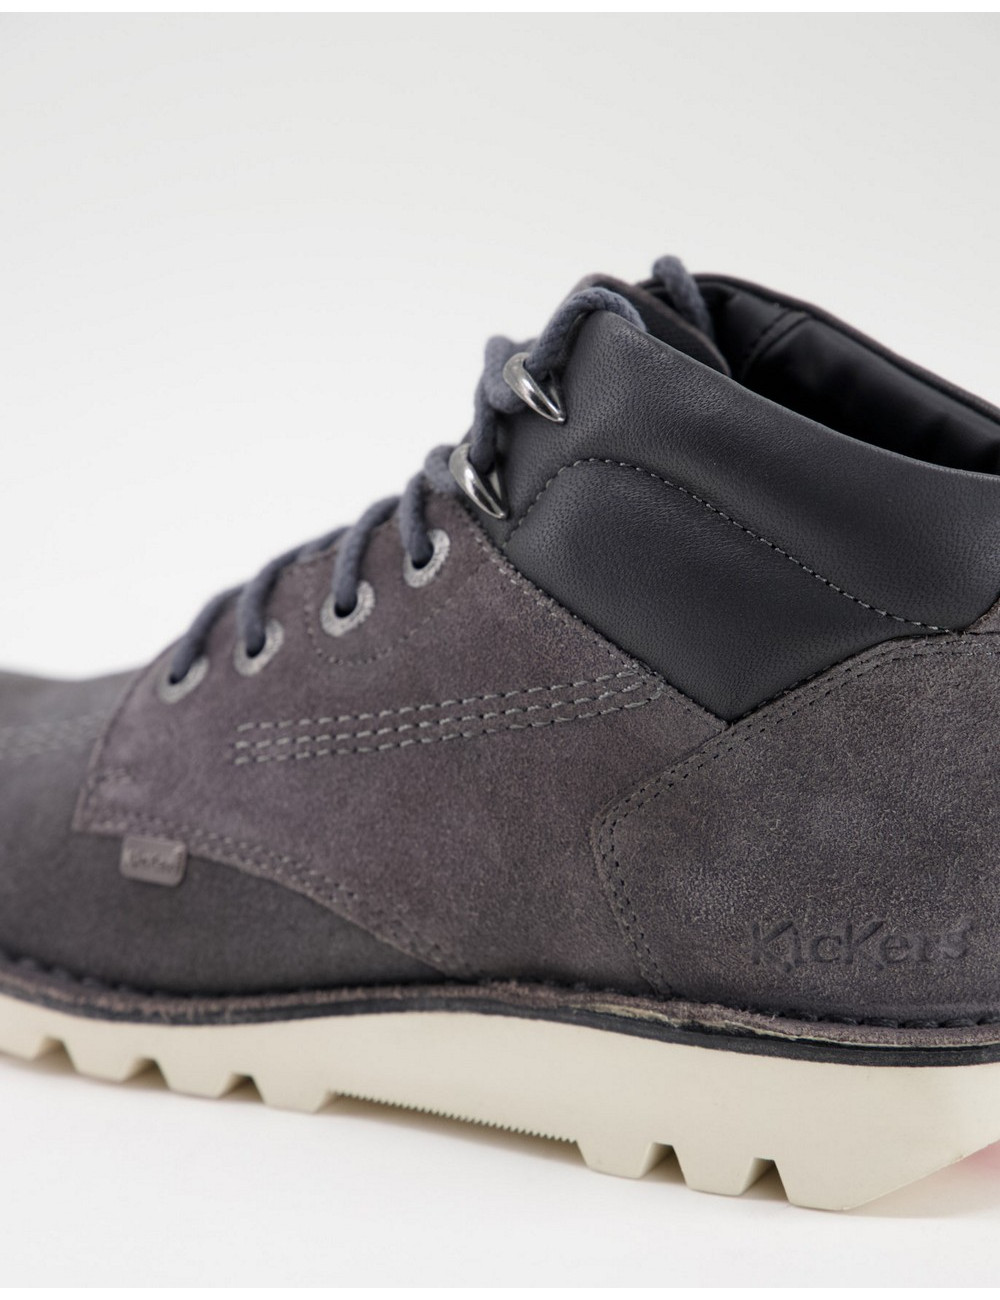 Kickerskick rover lace up...